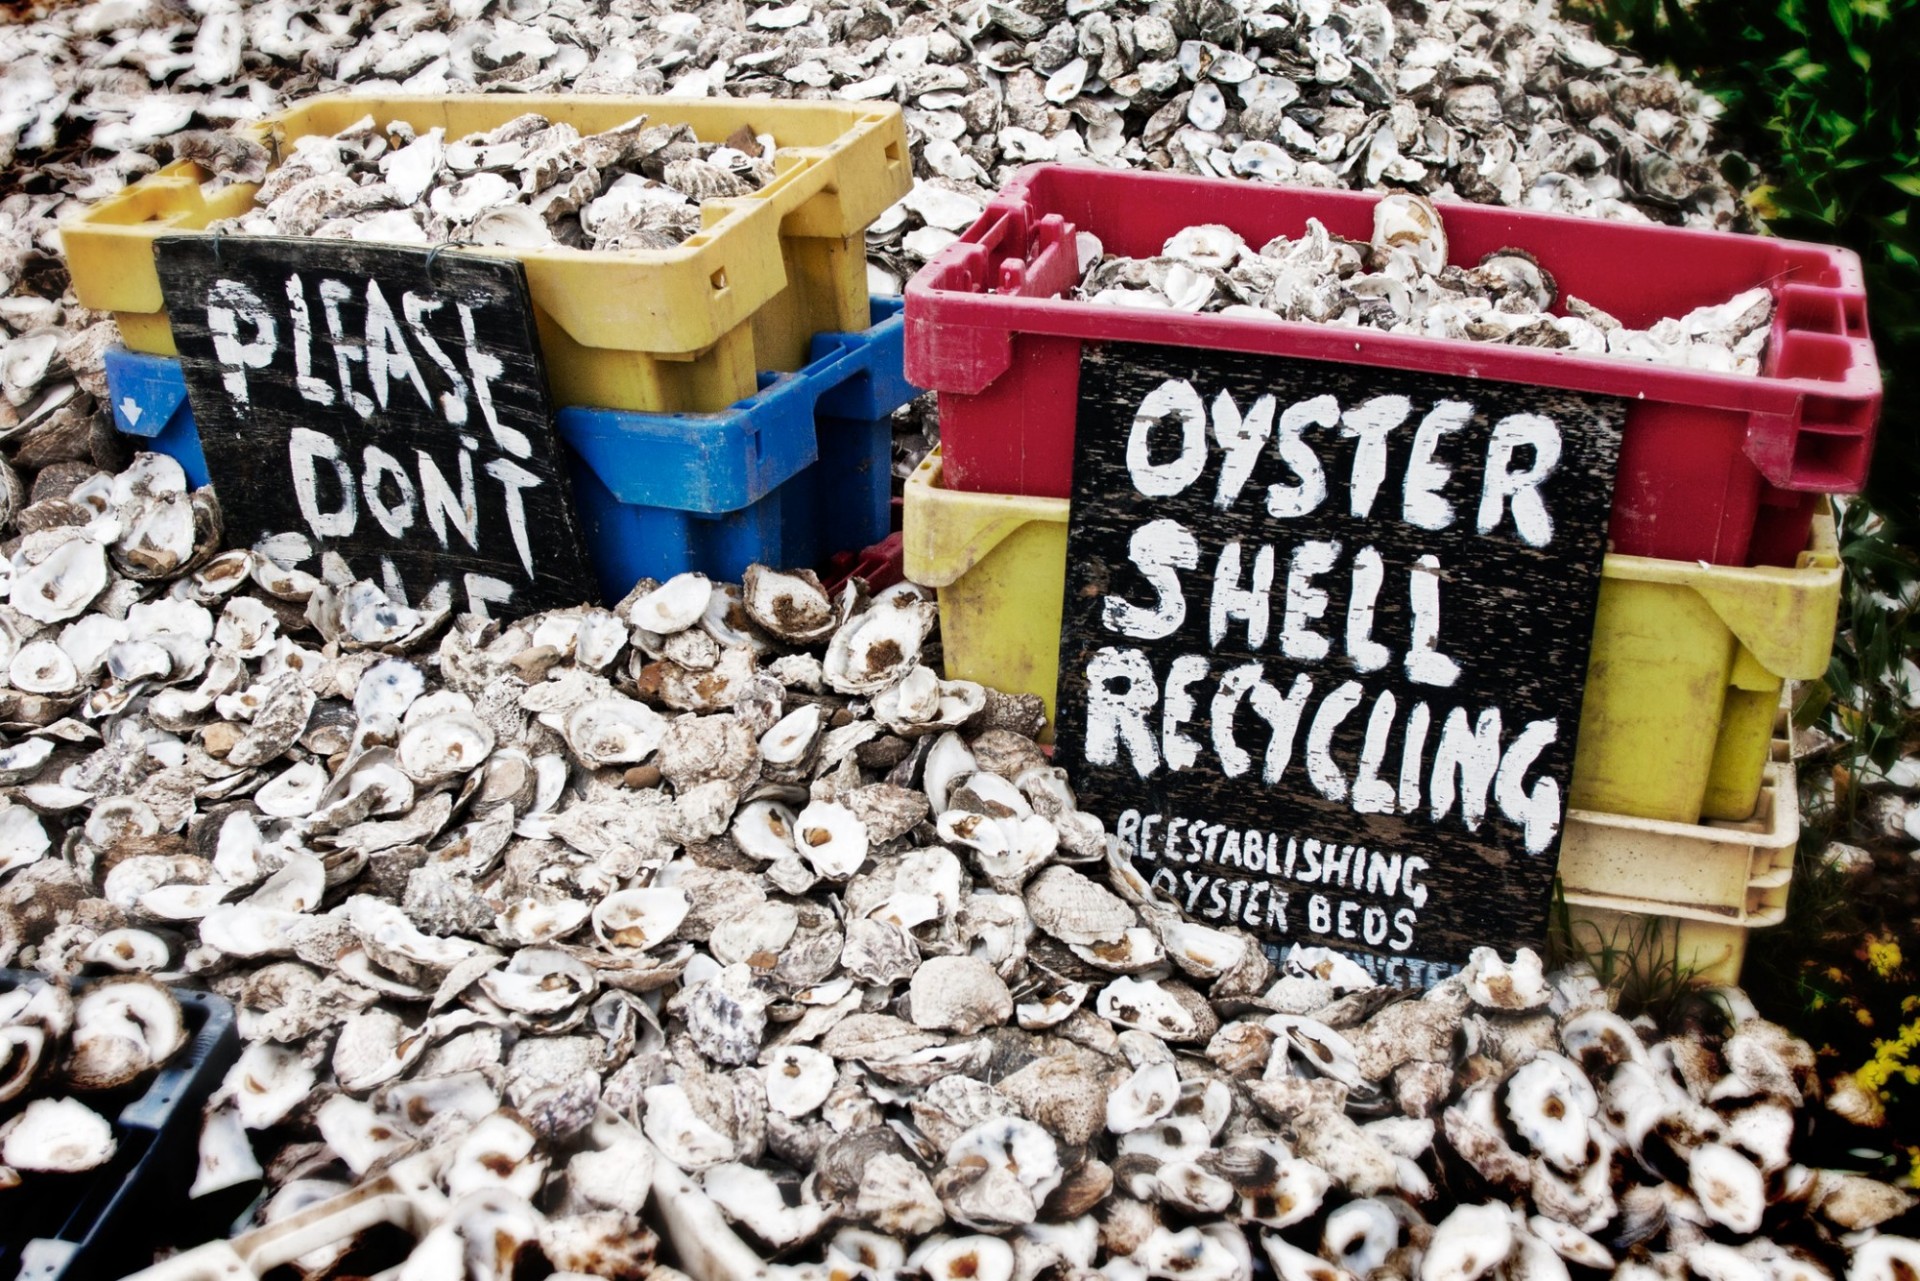 Hundreds of empty oyster shells on the ground and in plastic bins with signs that read "oyster shell recycling."